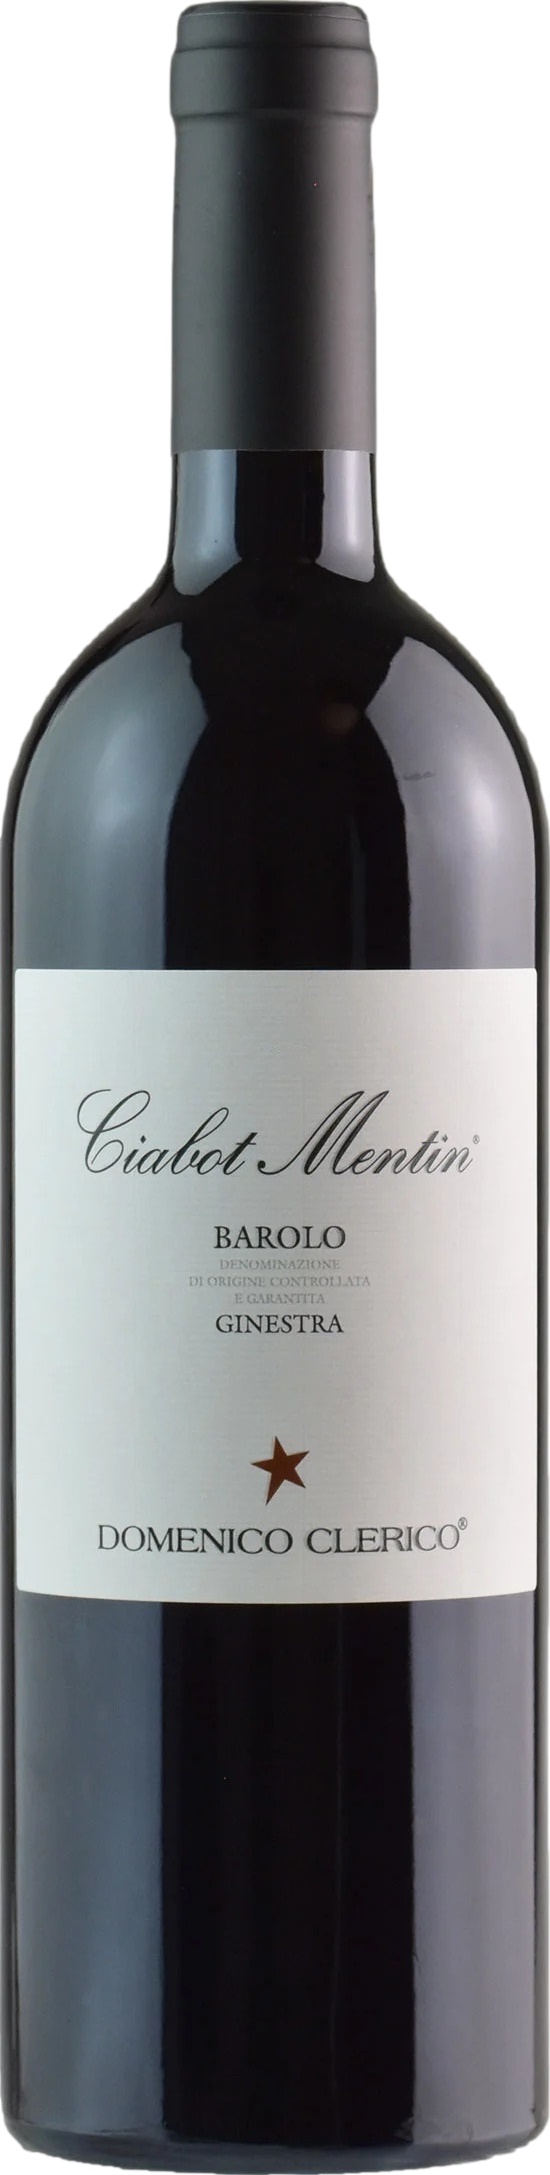 Product image of Domenico Clerico Barolo Ciabot Mentin 2019 from 8wines